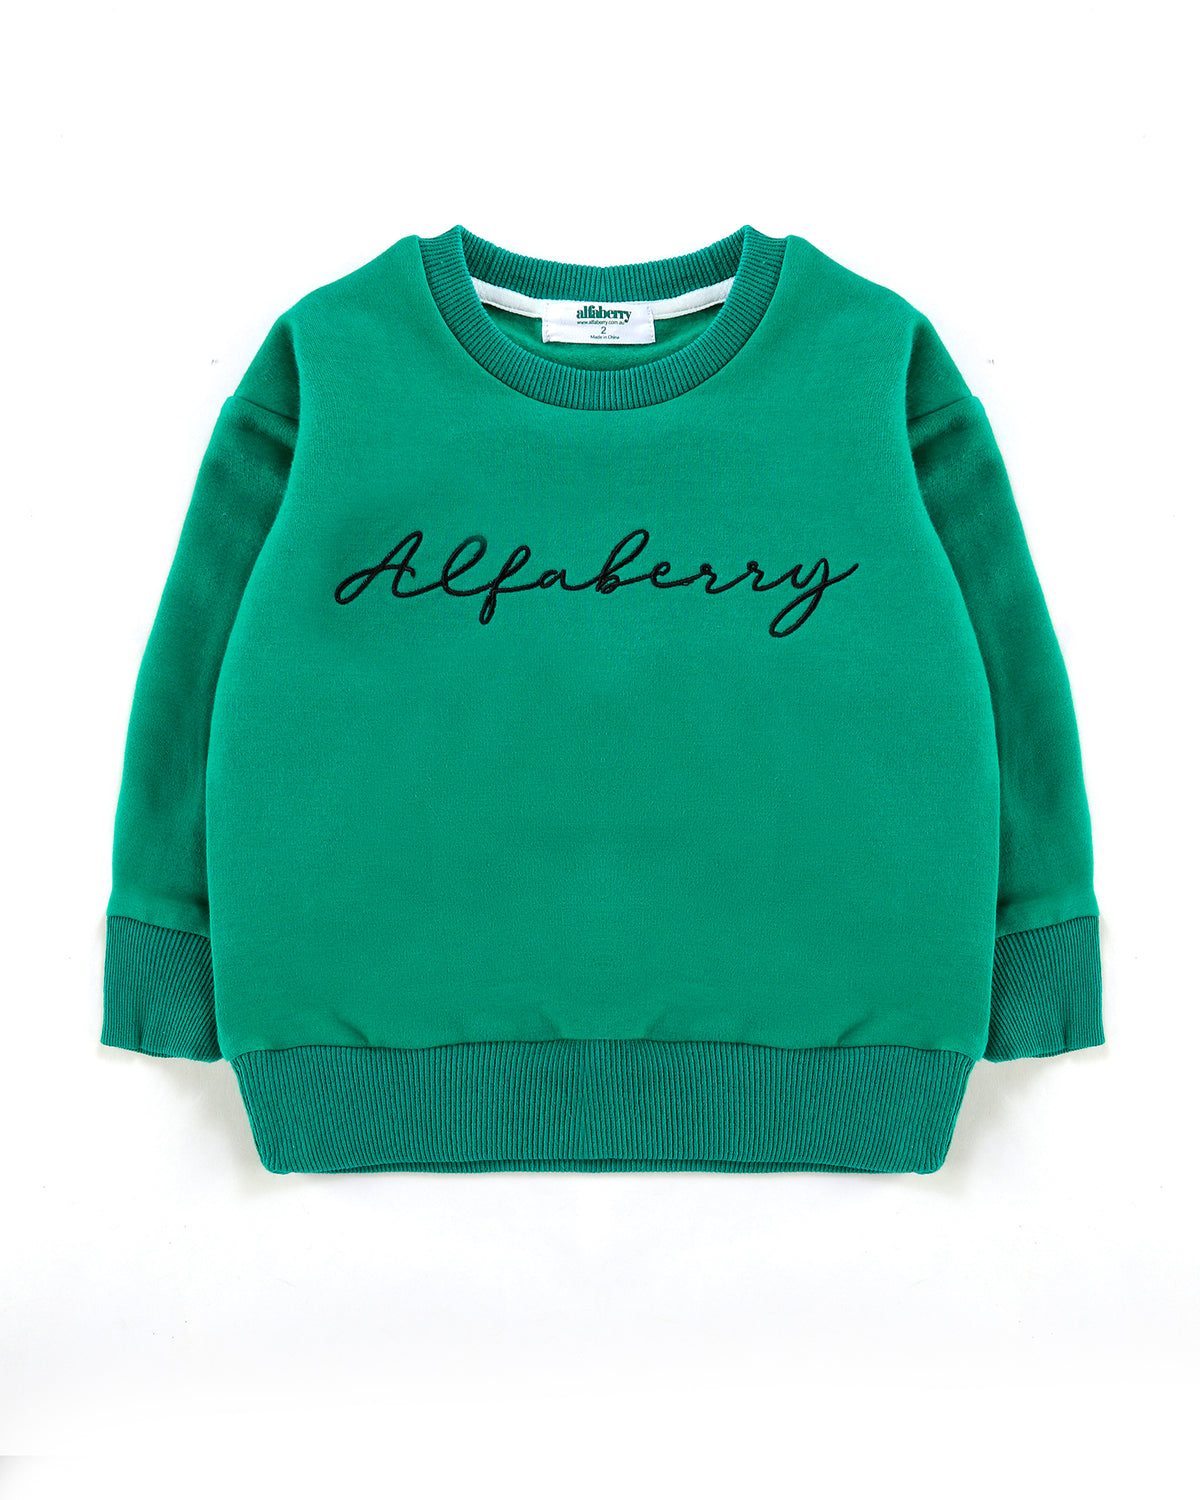 Alfaberry Signature Jumper in Green Front